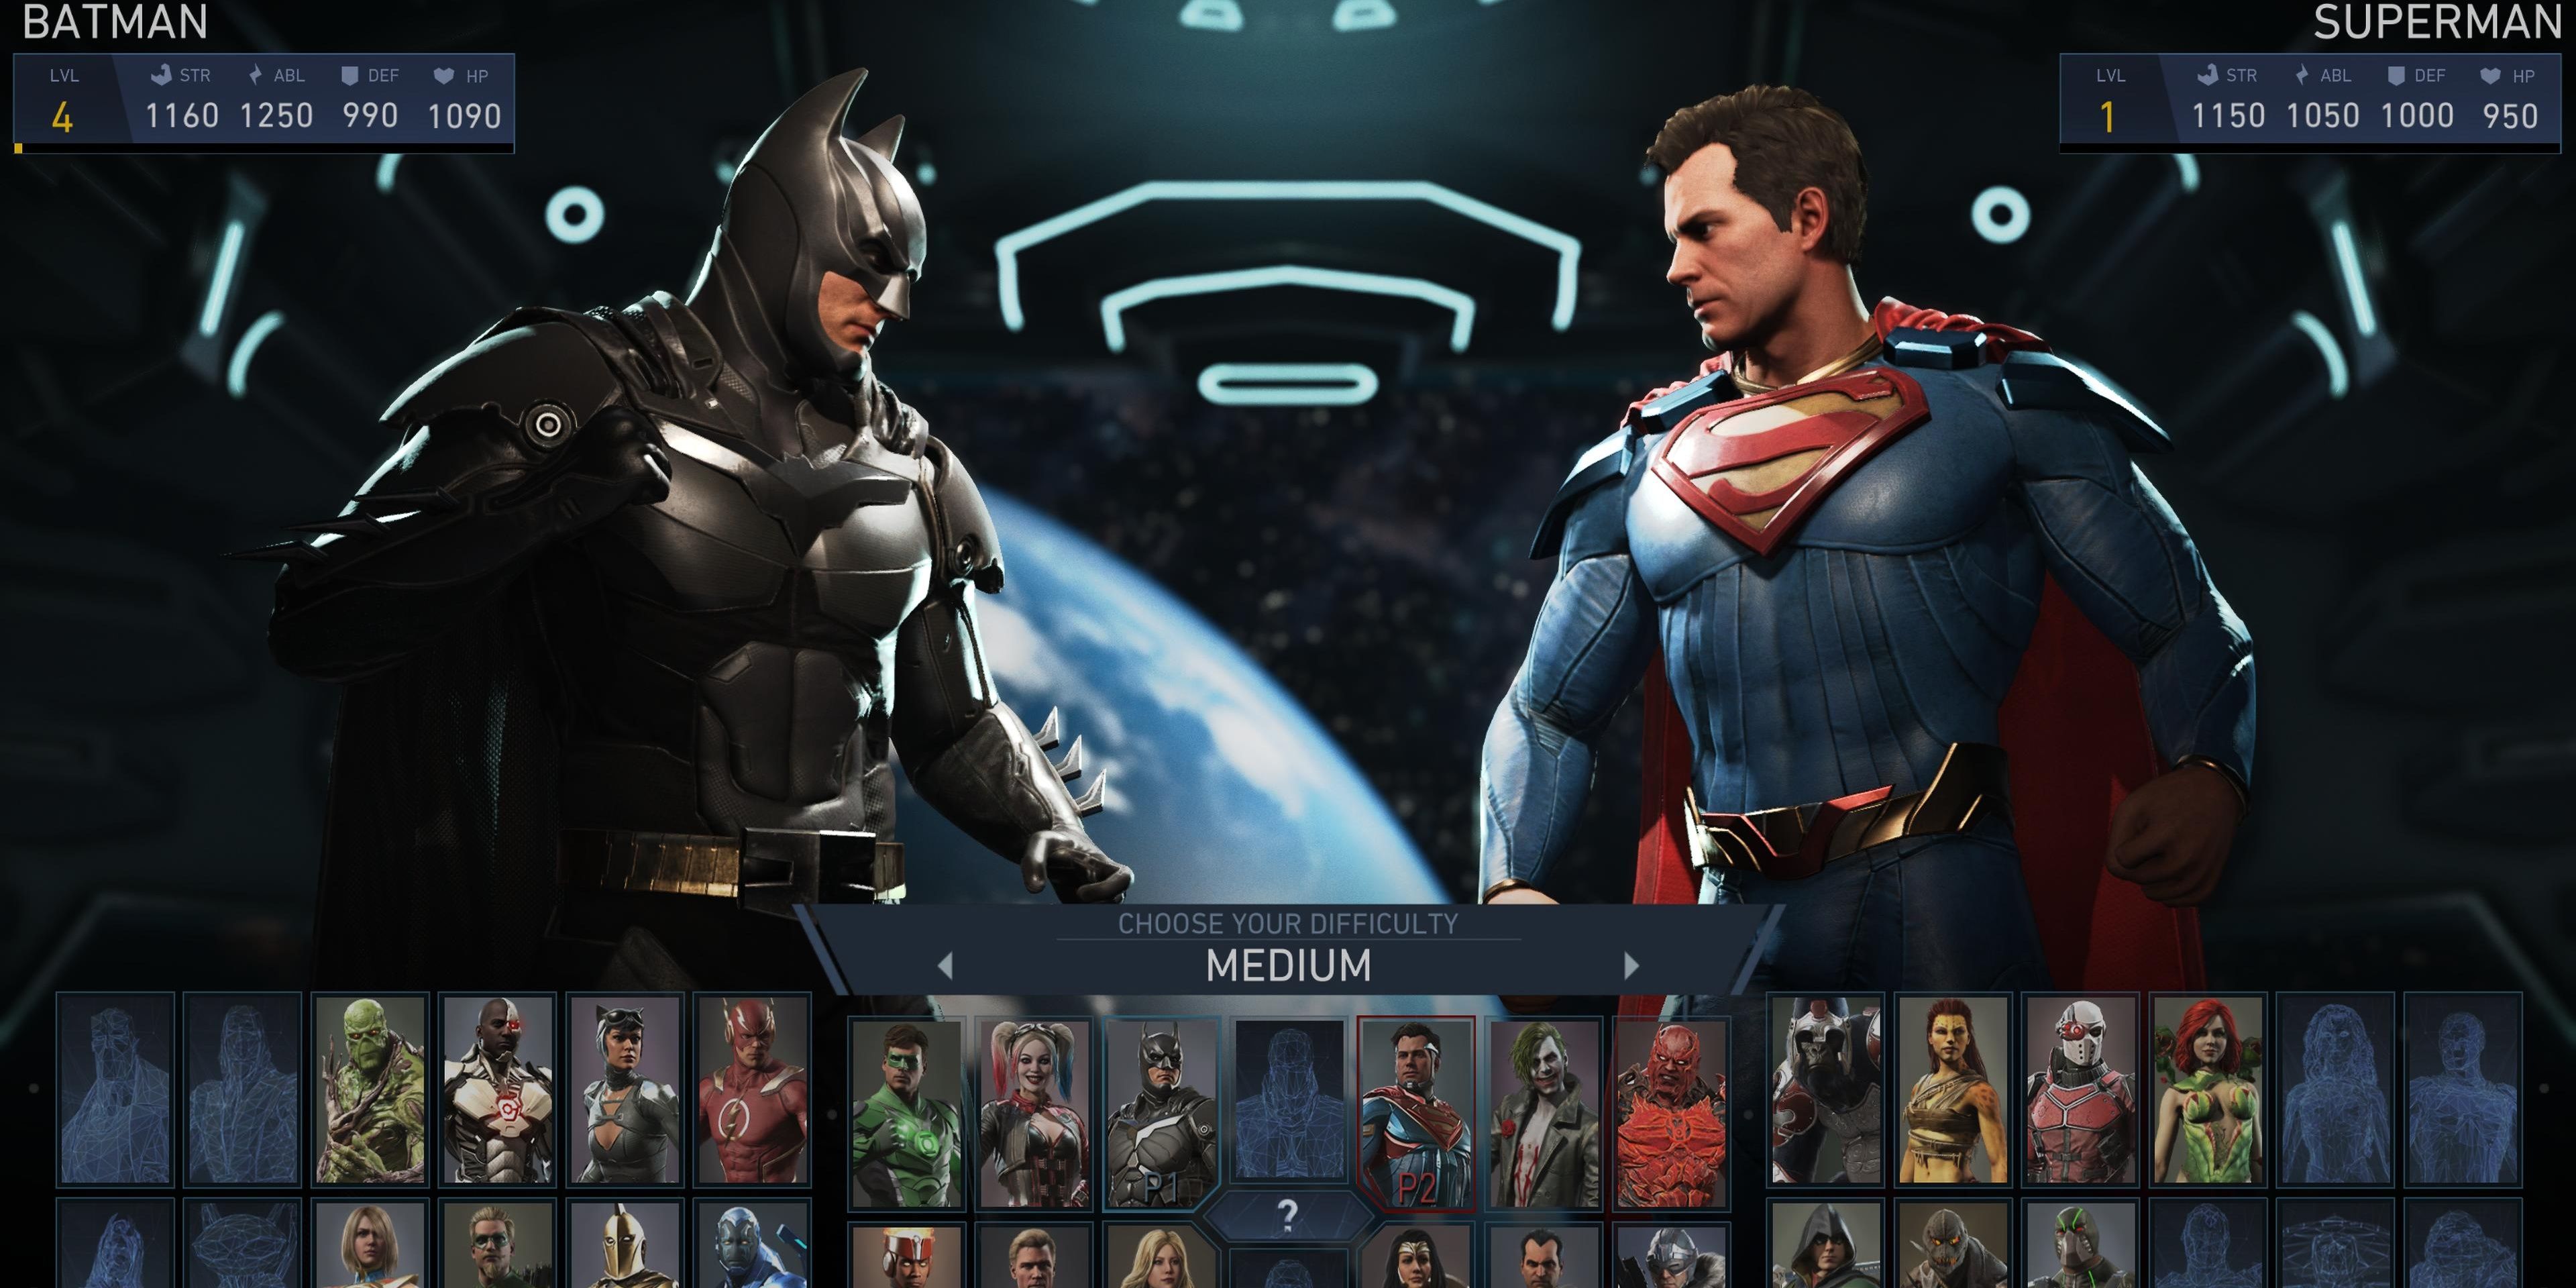 injustice 2 character selection screen